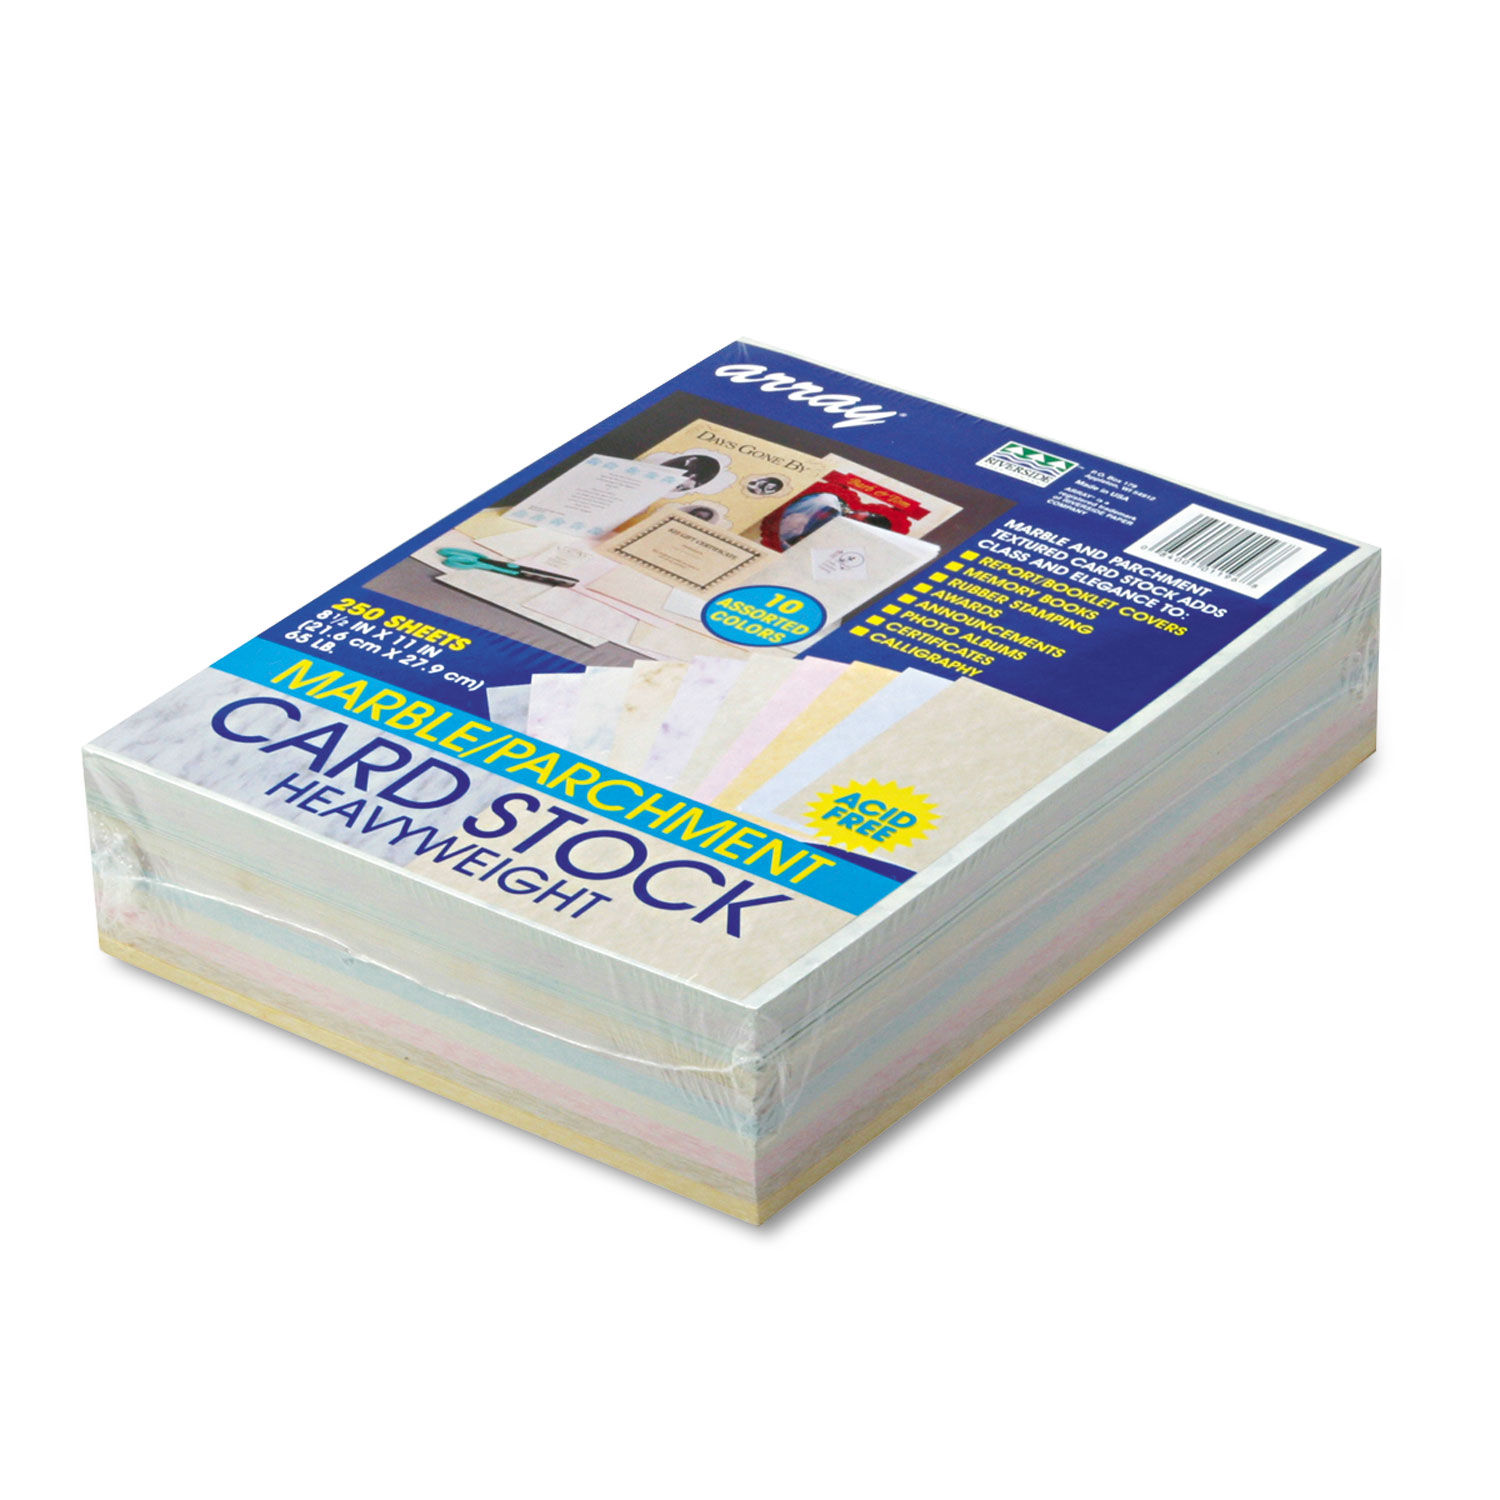 3 X 5 White Index cards, 65lb Cover